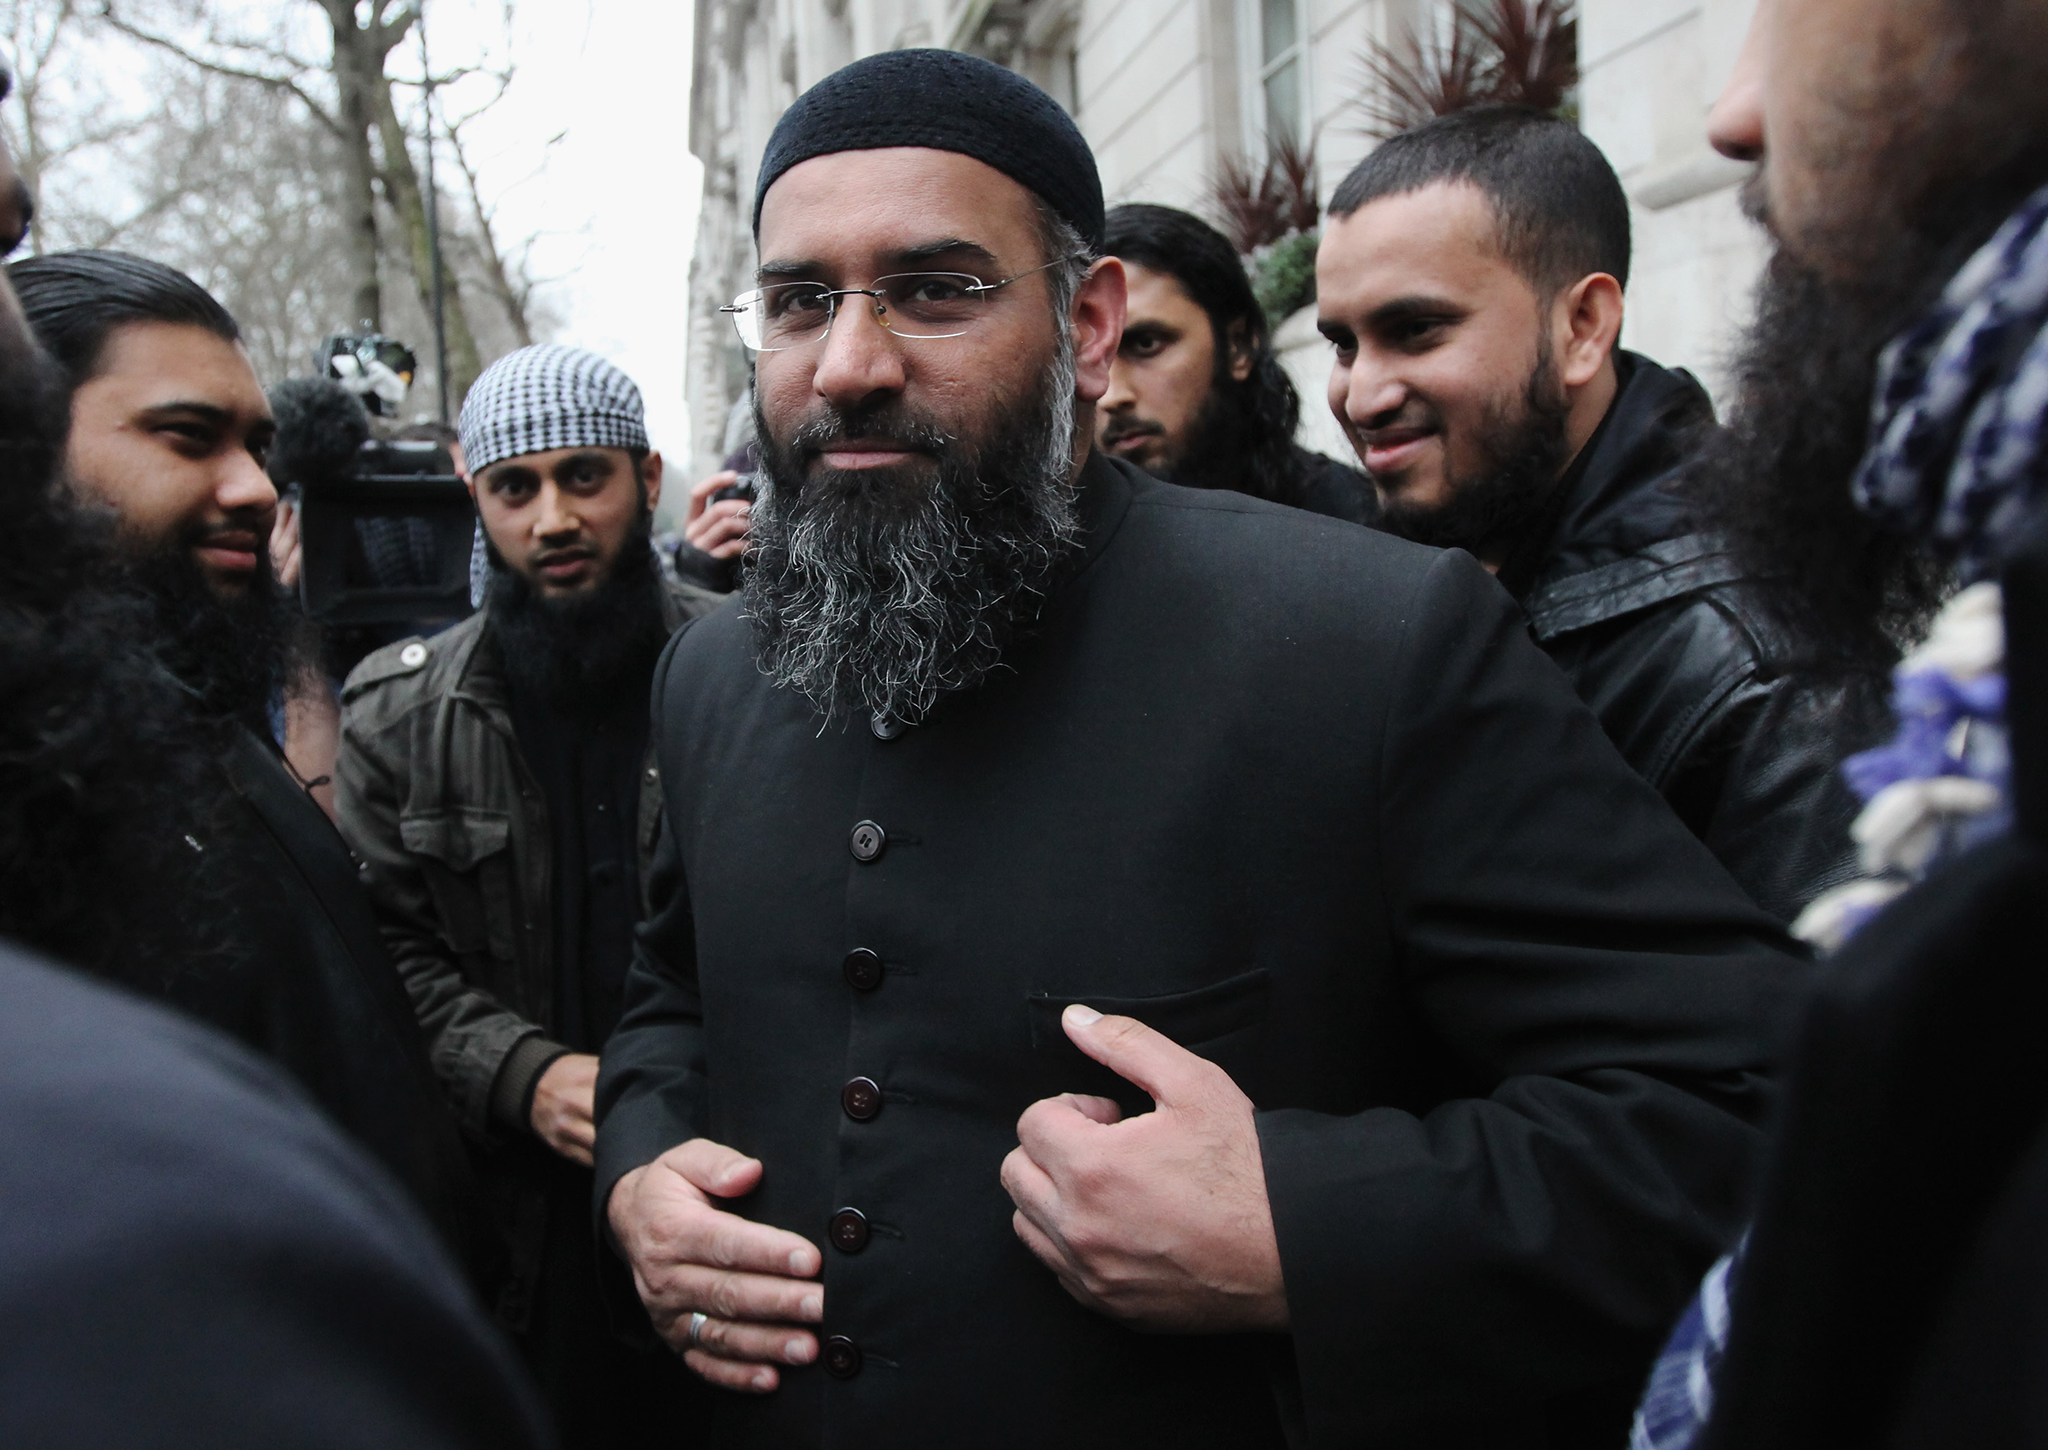 Anjem Choudary leaves a press conference in Millbank Studios in 2010